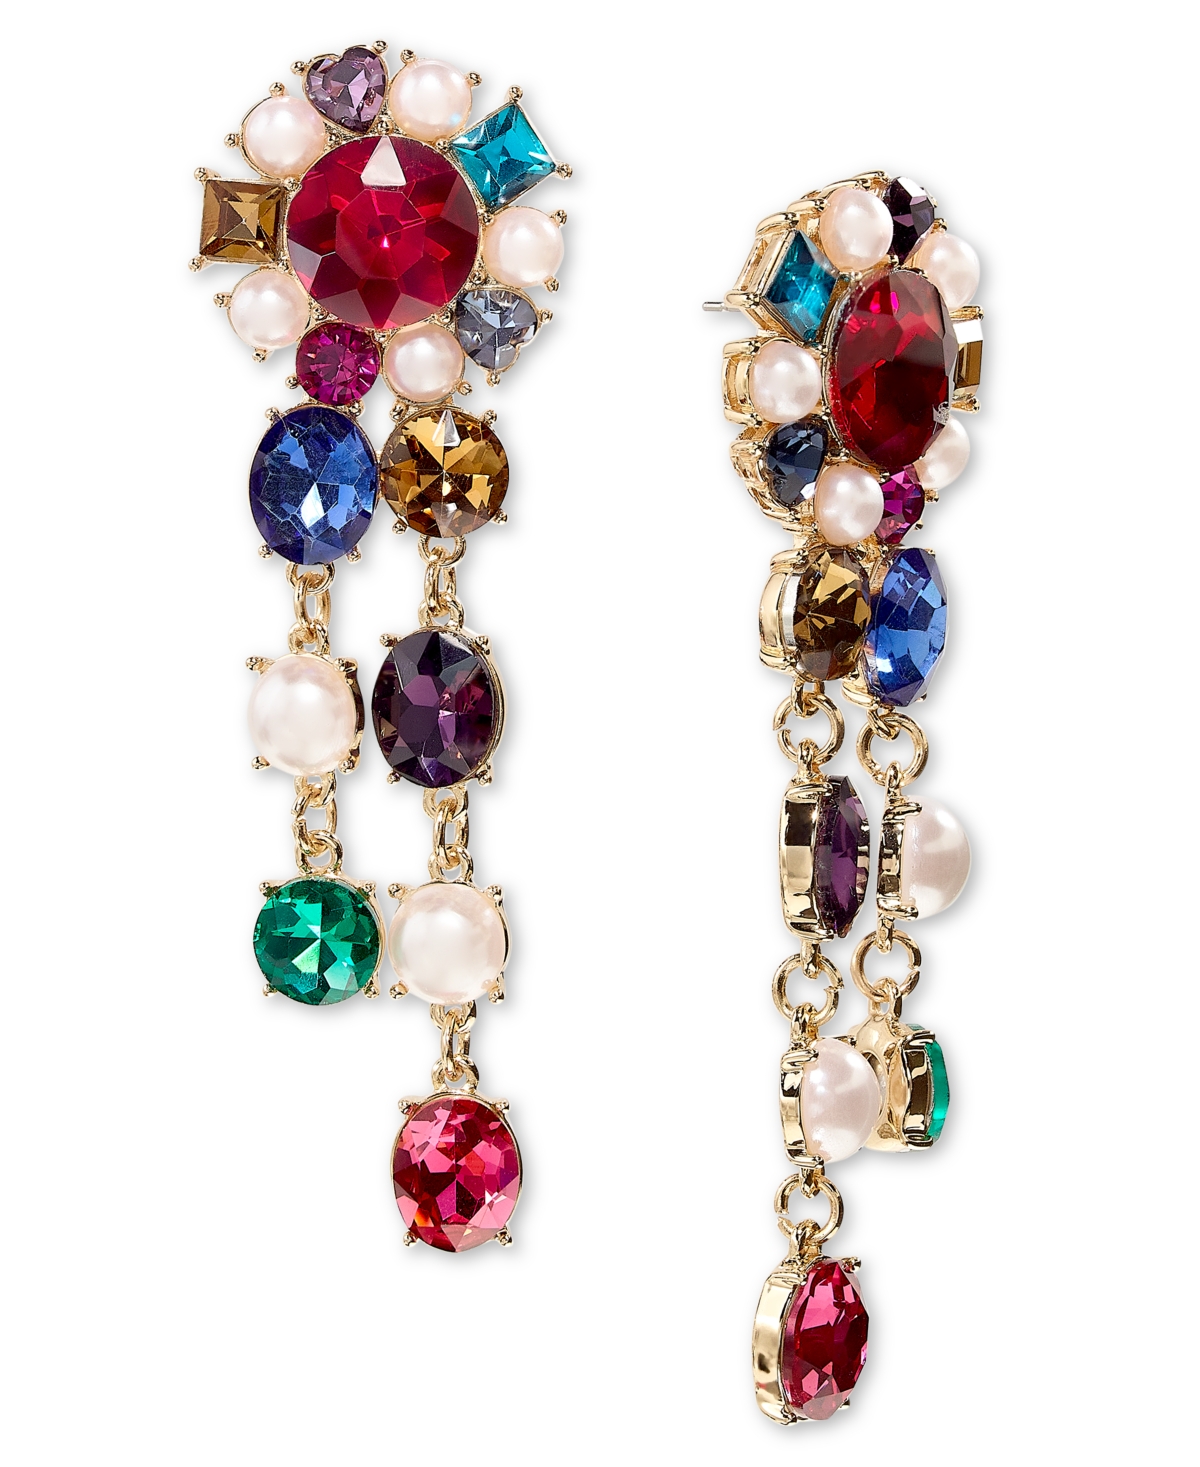 Gold-Tone Multicolor Stone Drop Earrings, Created for Macy's - Multi